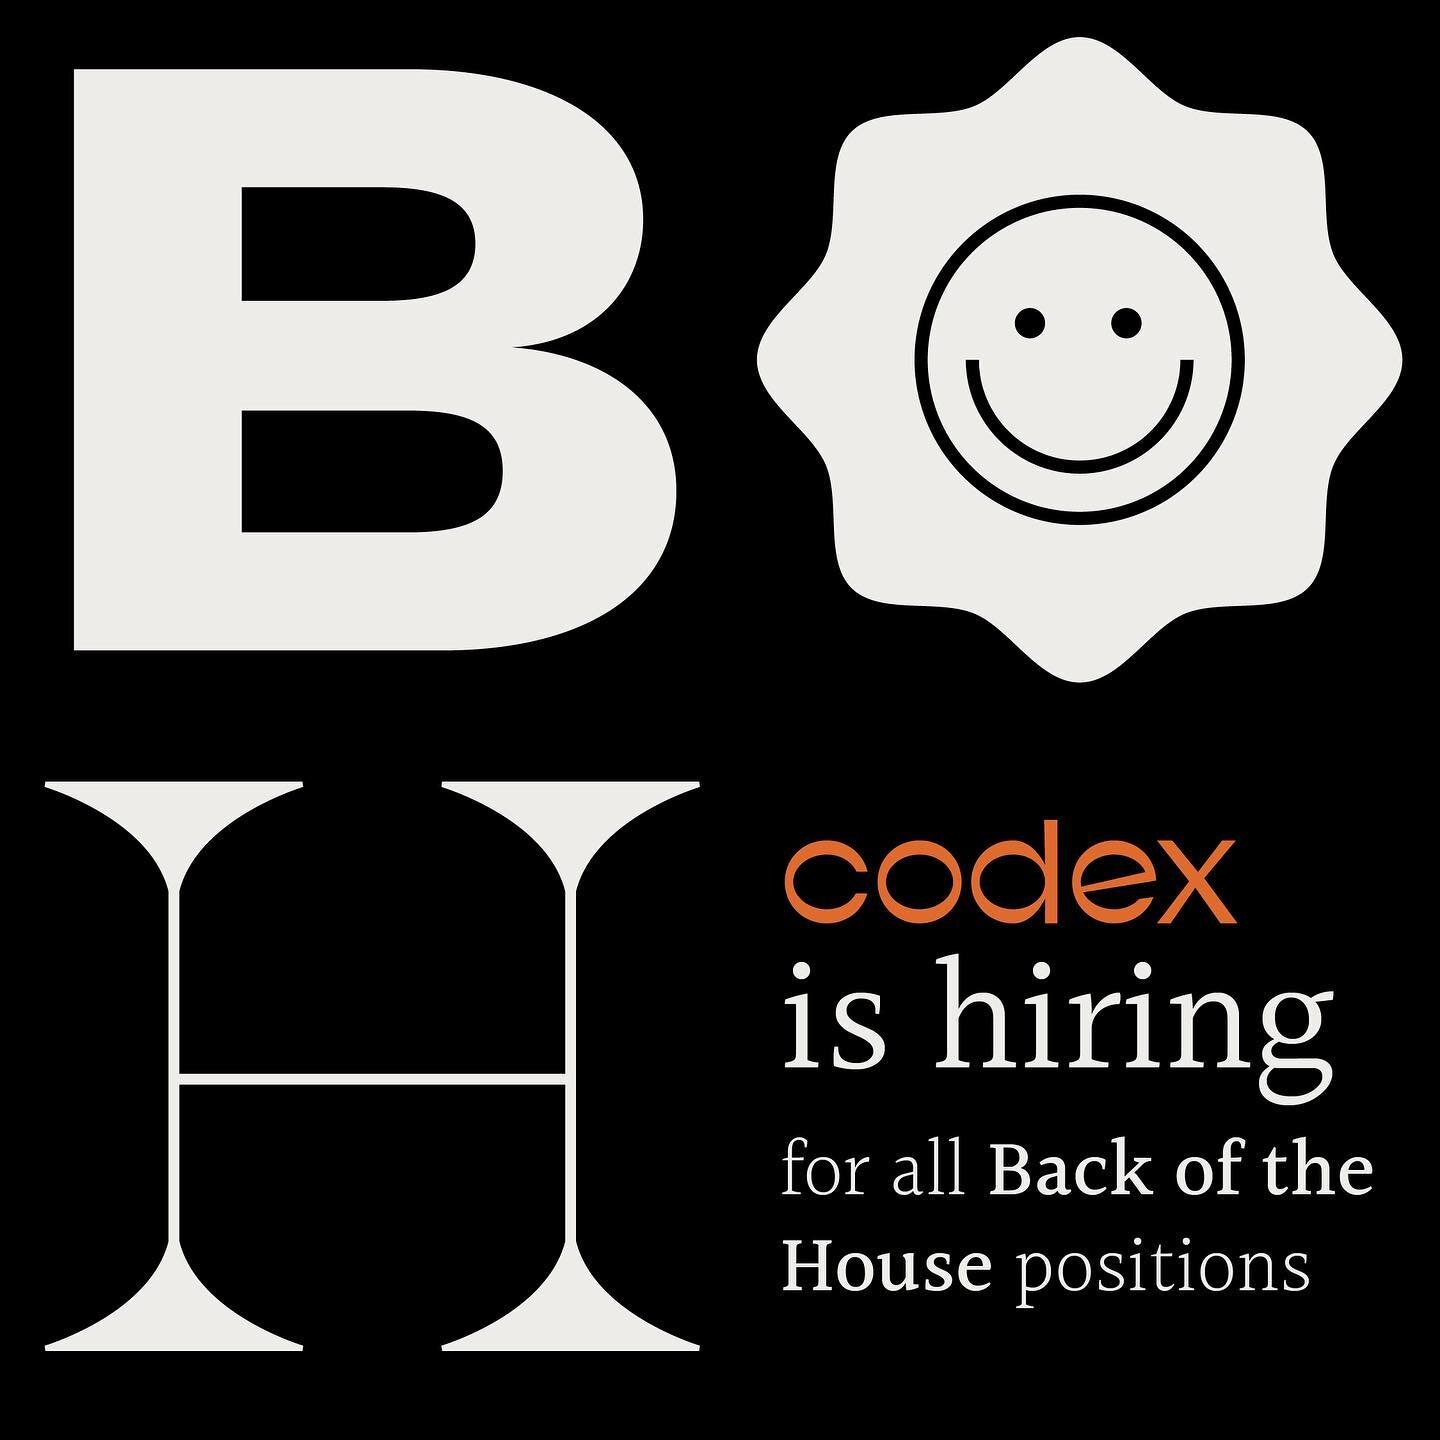 📢 We Are Hiring for all BOH positions! Contact us today 📢

#nowhiring #workatcodex